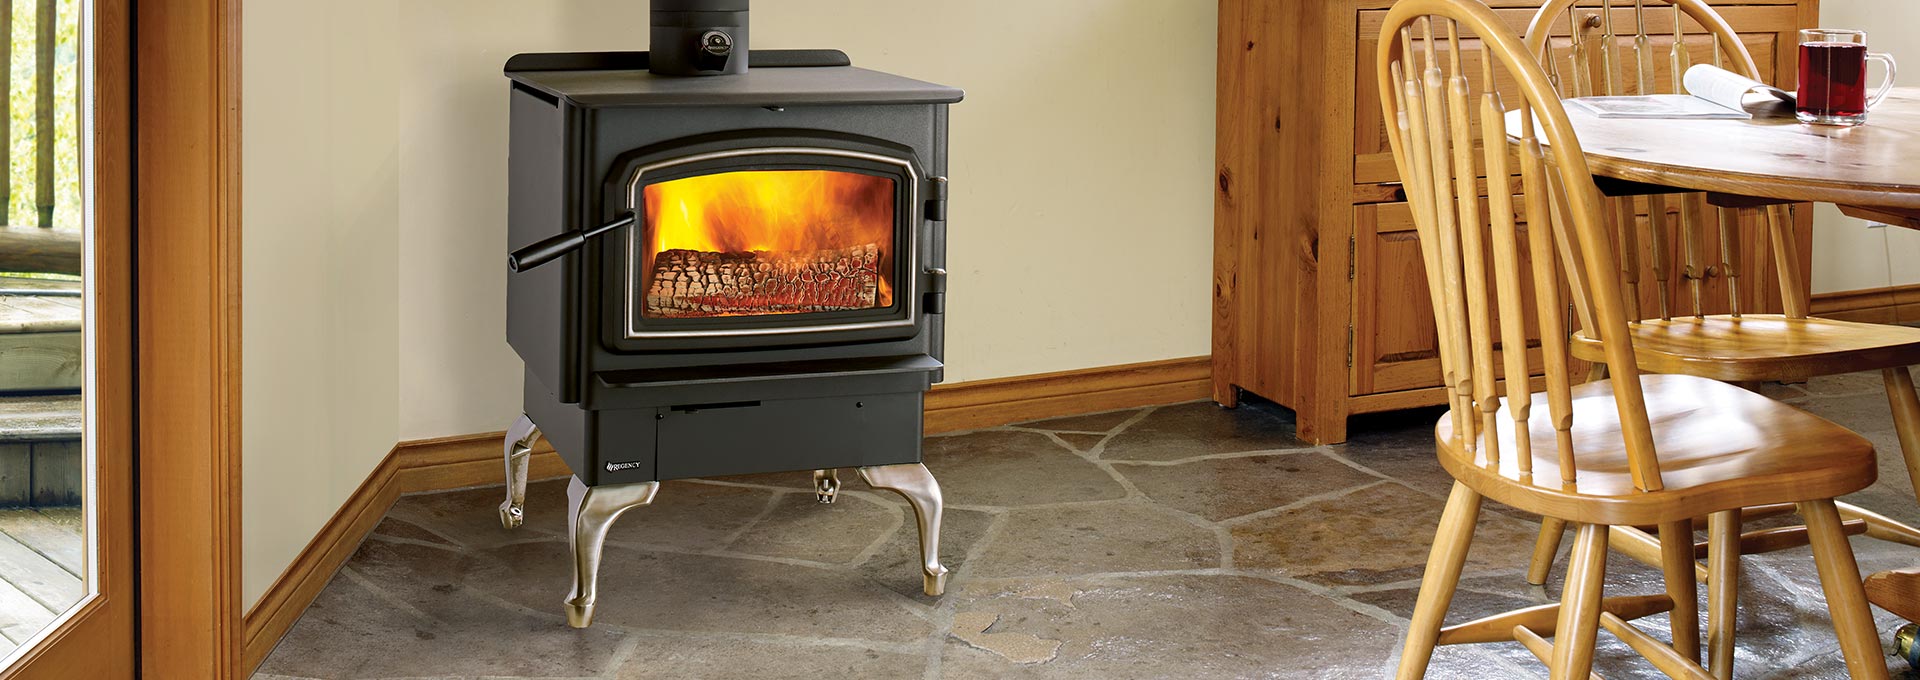 Fireplace Pizza Oven Combo Best Of Wood Stoves